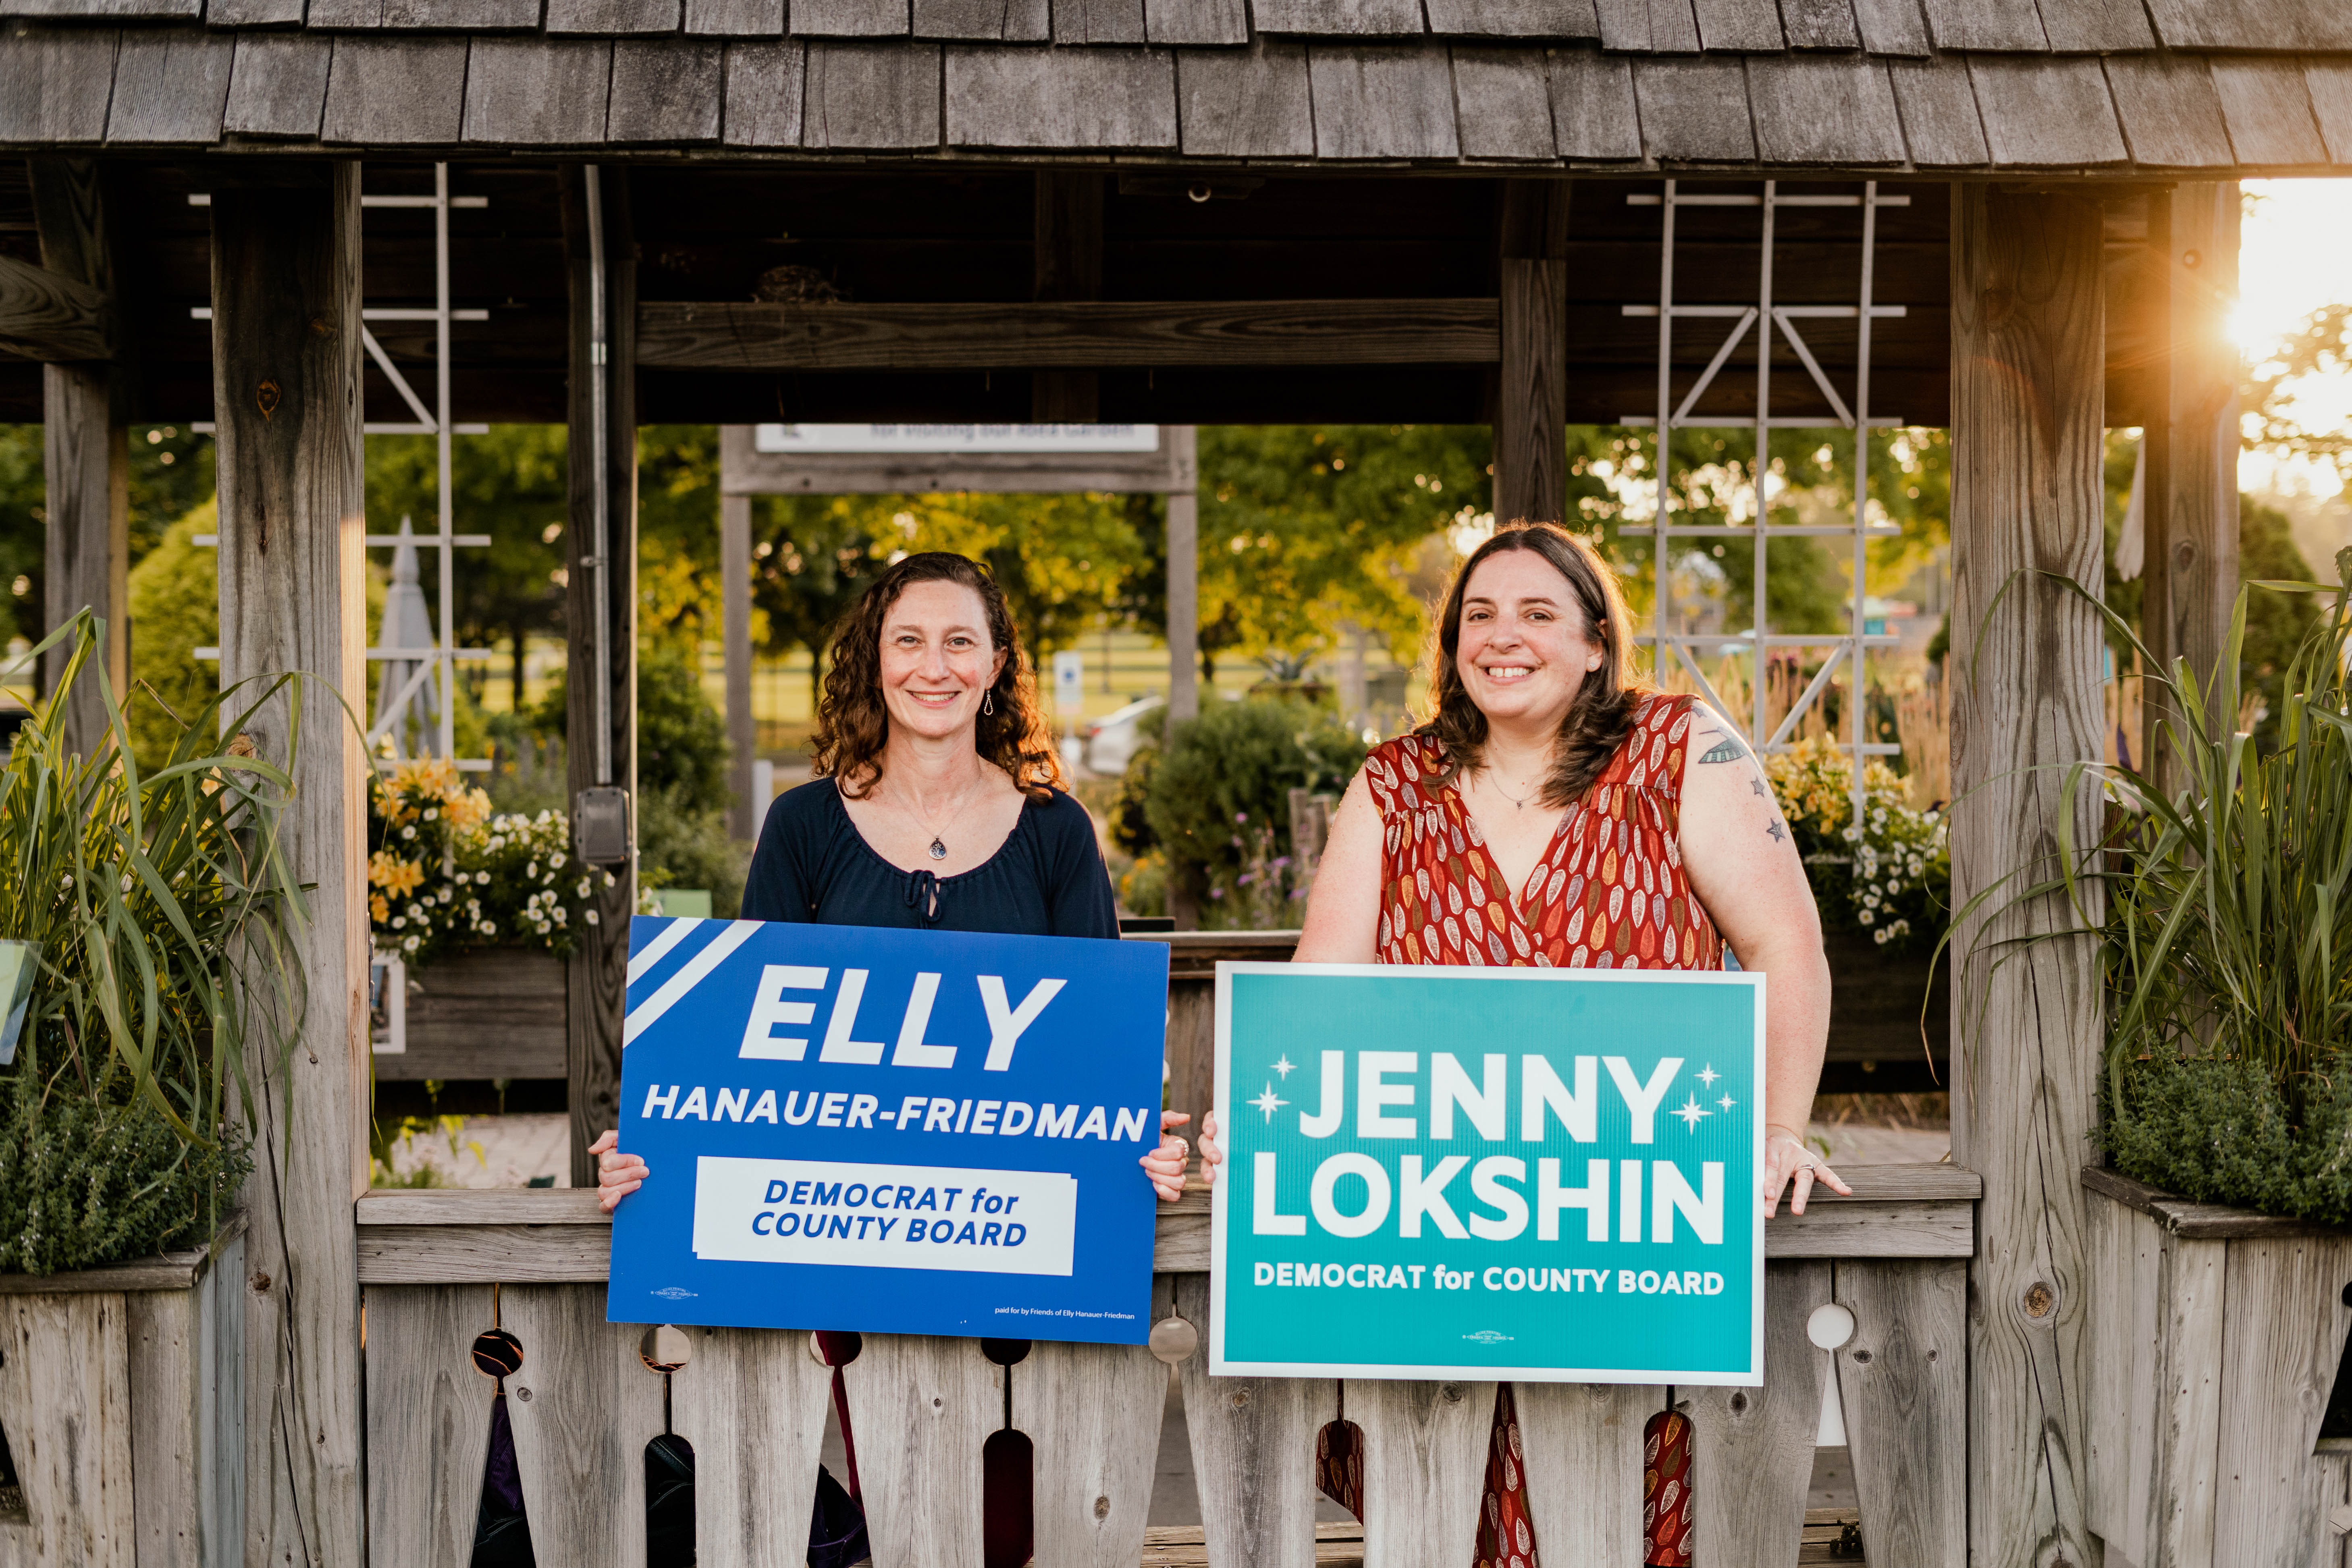 Jenny Lokshin and Elly Hanauer-Friedman are hoping to turn District 4 blue